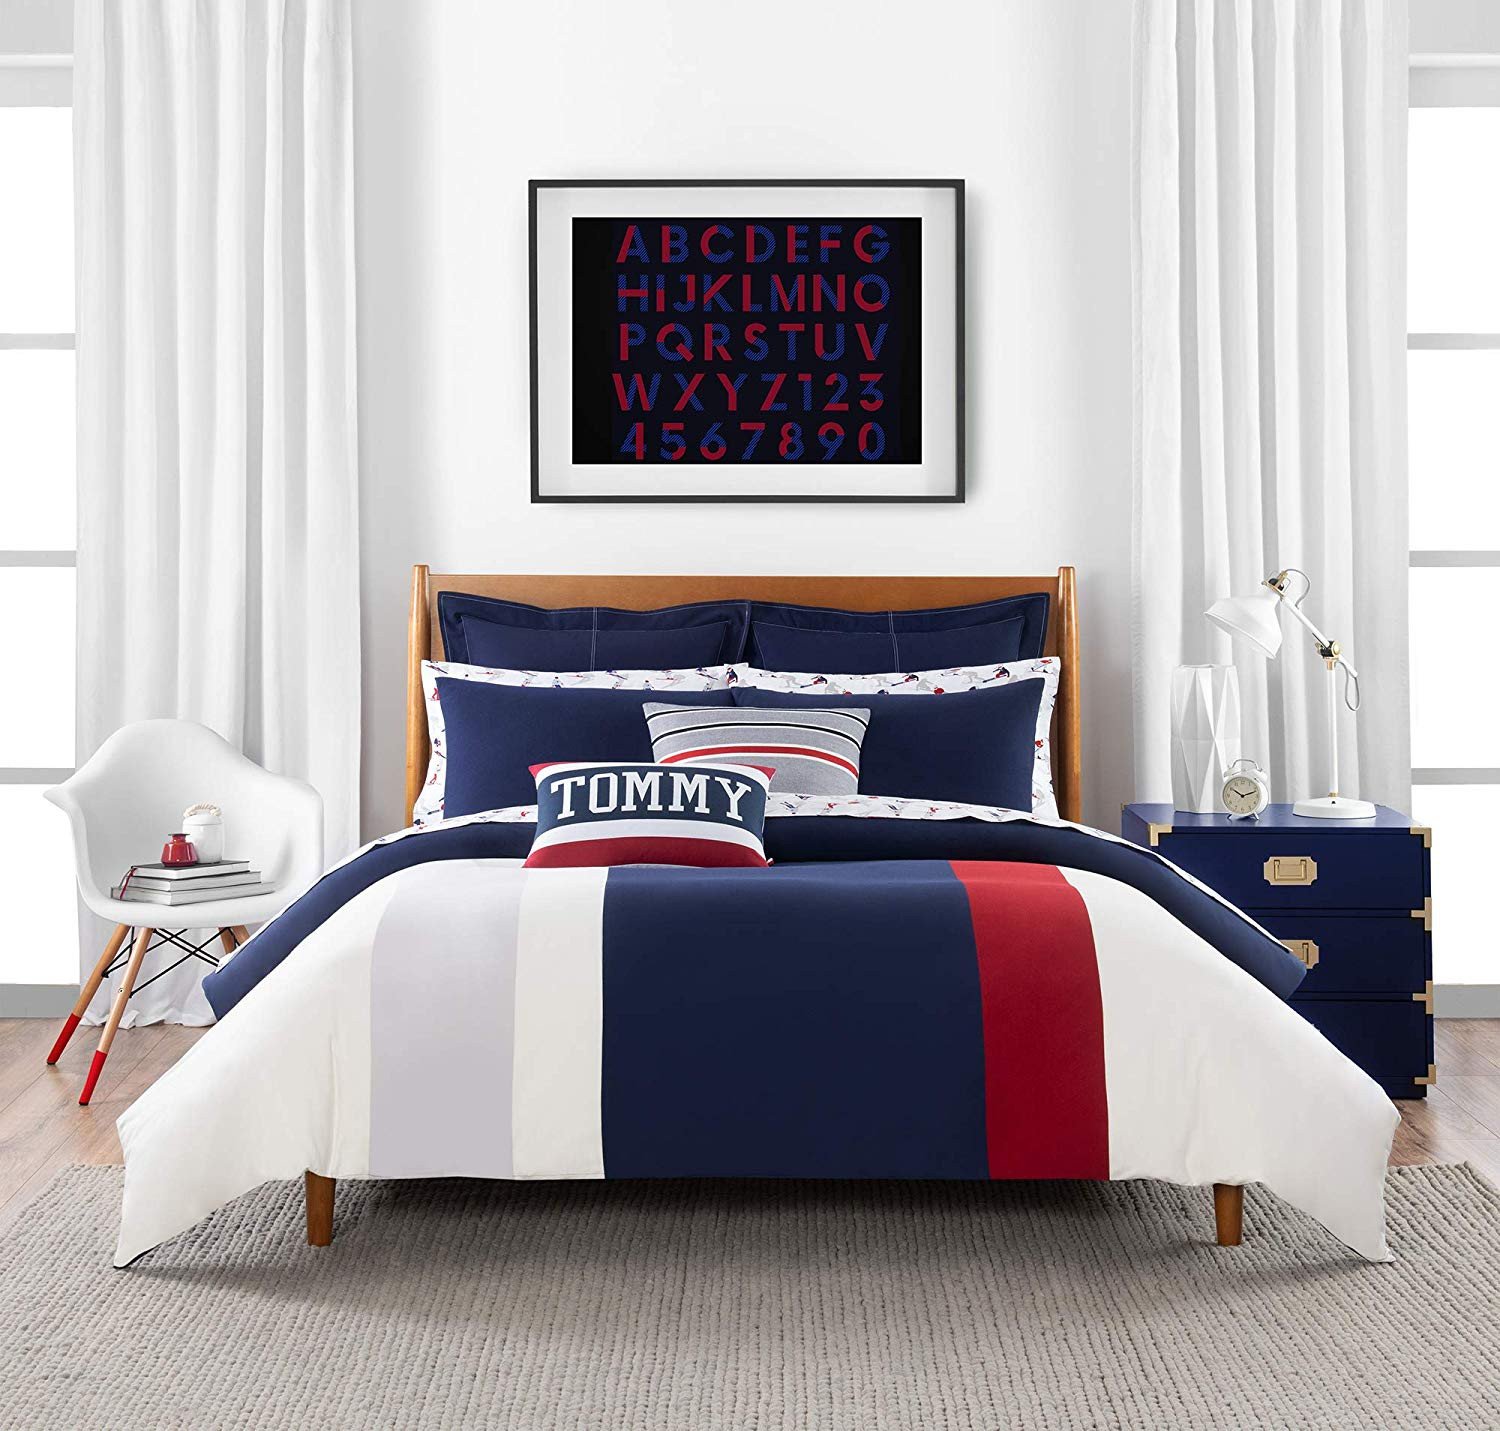 Bedroom In A Bag with Curtains Unique Amazon tommy Hilfiger Clash Of 85 Stripe Bedding